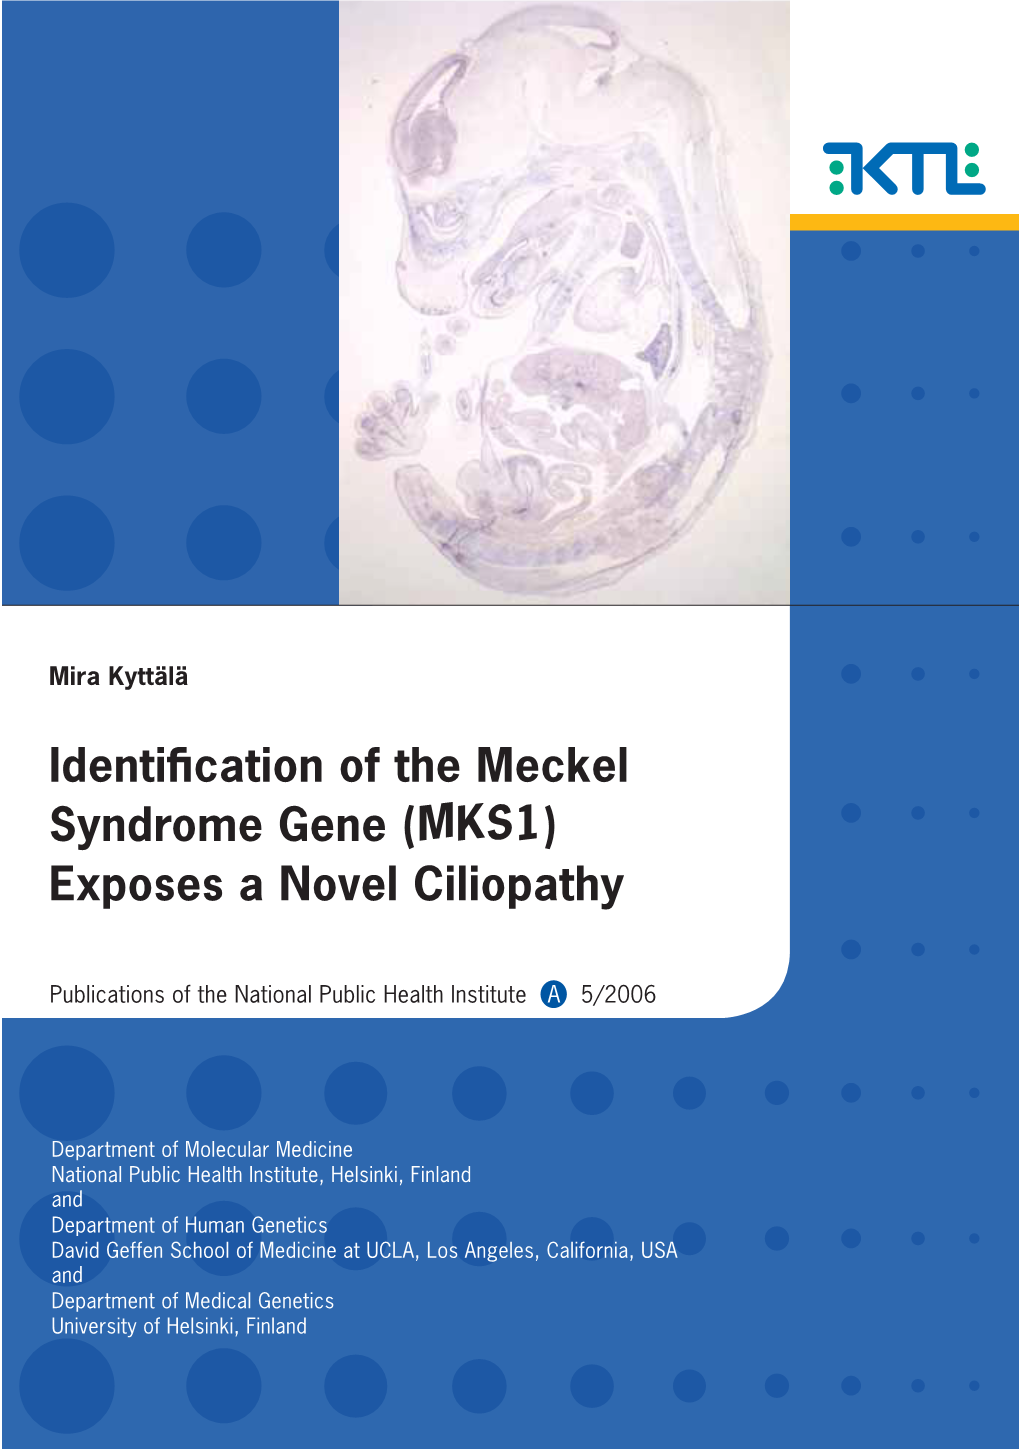 Identiffcation of the Meckel Syndrome Gene (MKS1)